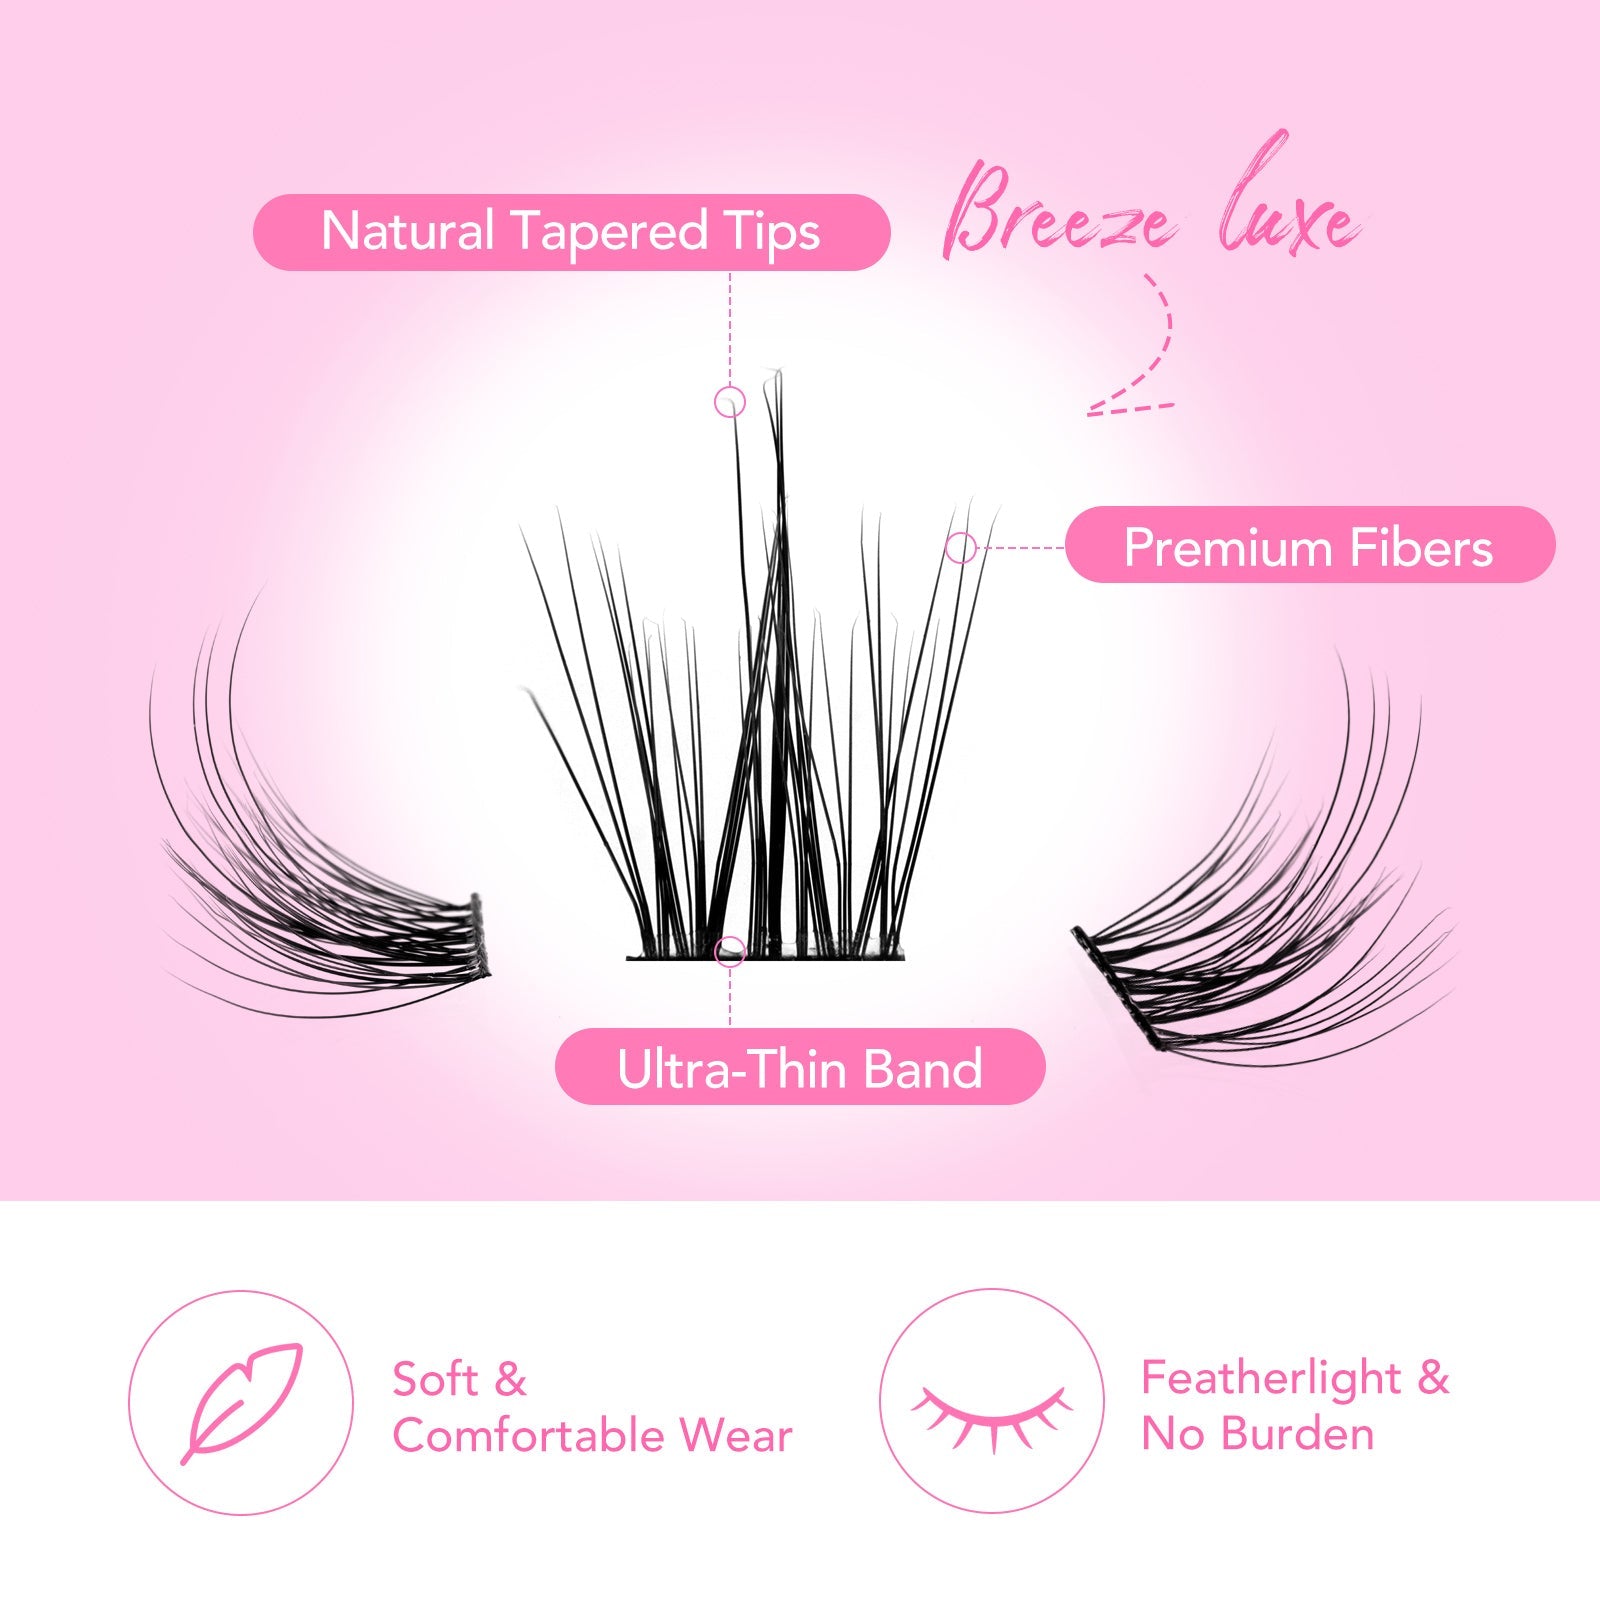 BREEZE LUXE DIY Cluster Lashes - Calailis Beauty